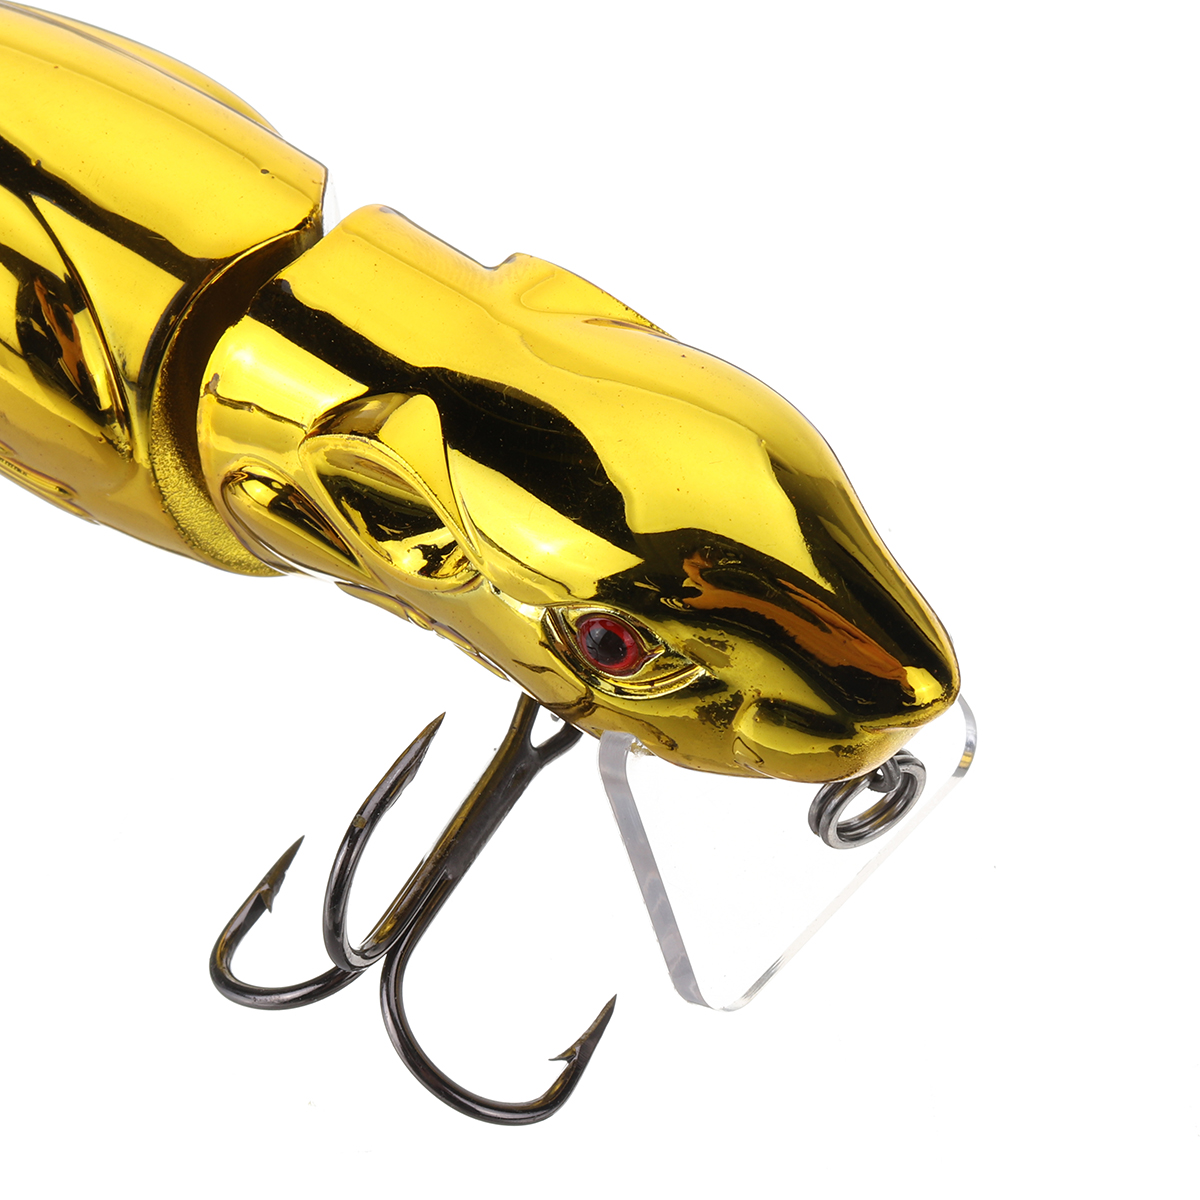 ZANLURE-1PC-16CM-45g-3D-Eyes-Mice-Rat-Shape-Lure-Artificial-Fishing-Bait-With-2-Hooks-Fishing-Tackle-1646066-10